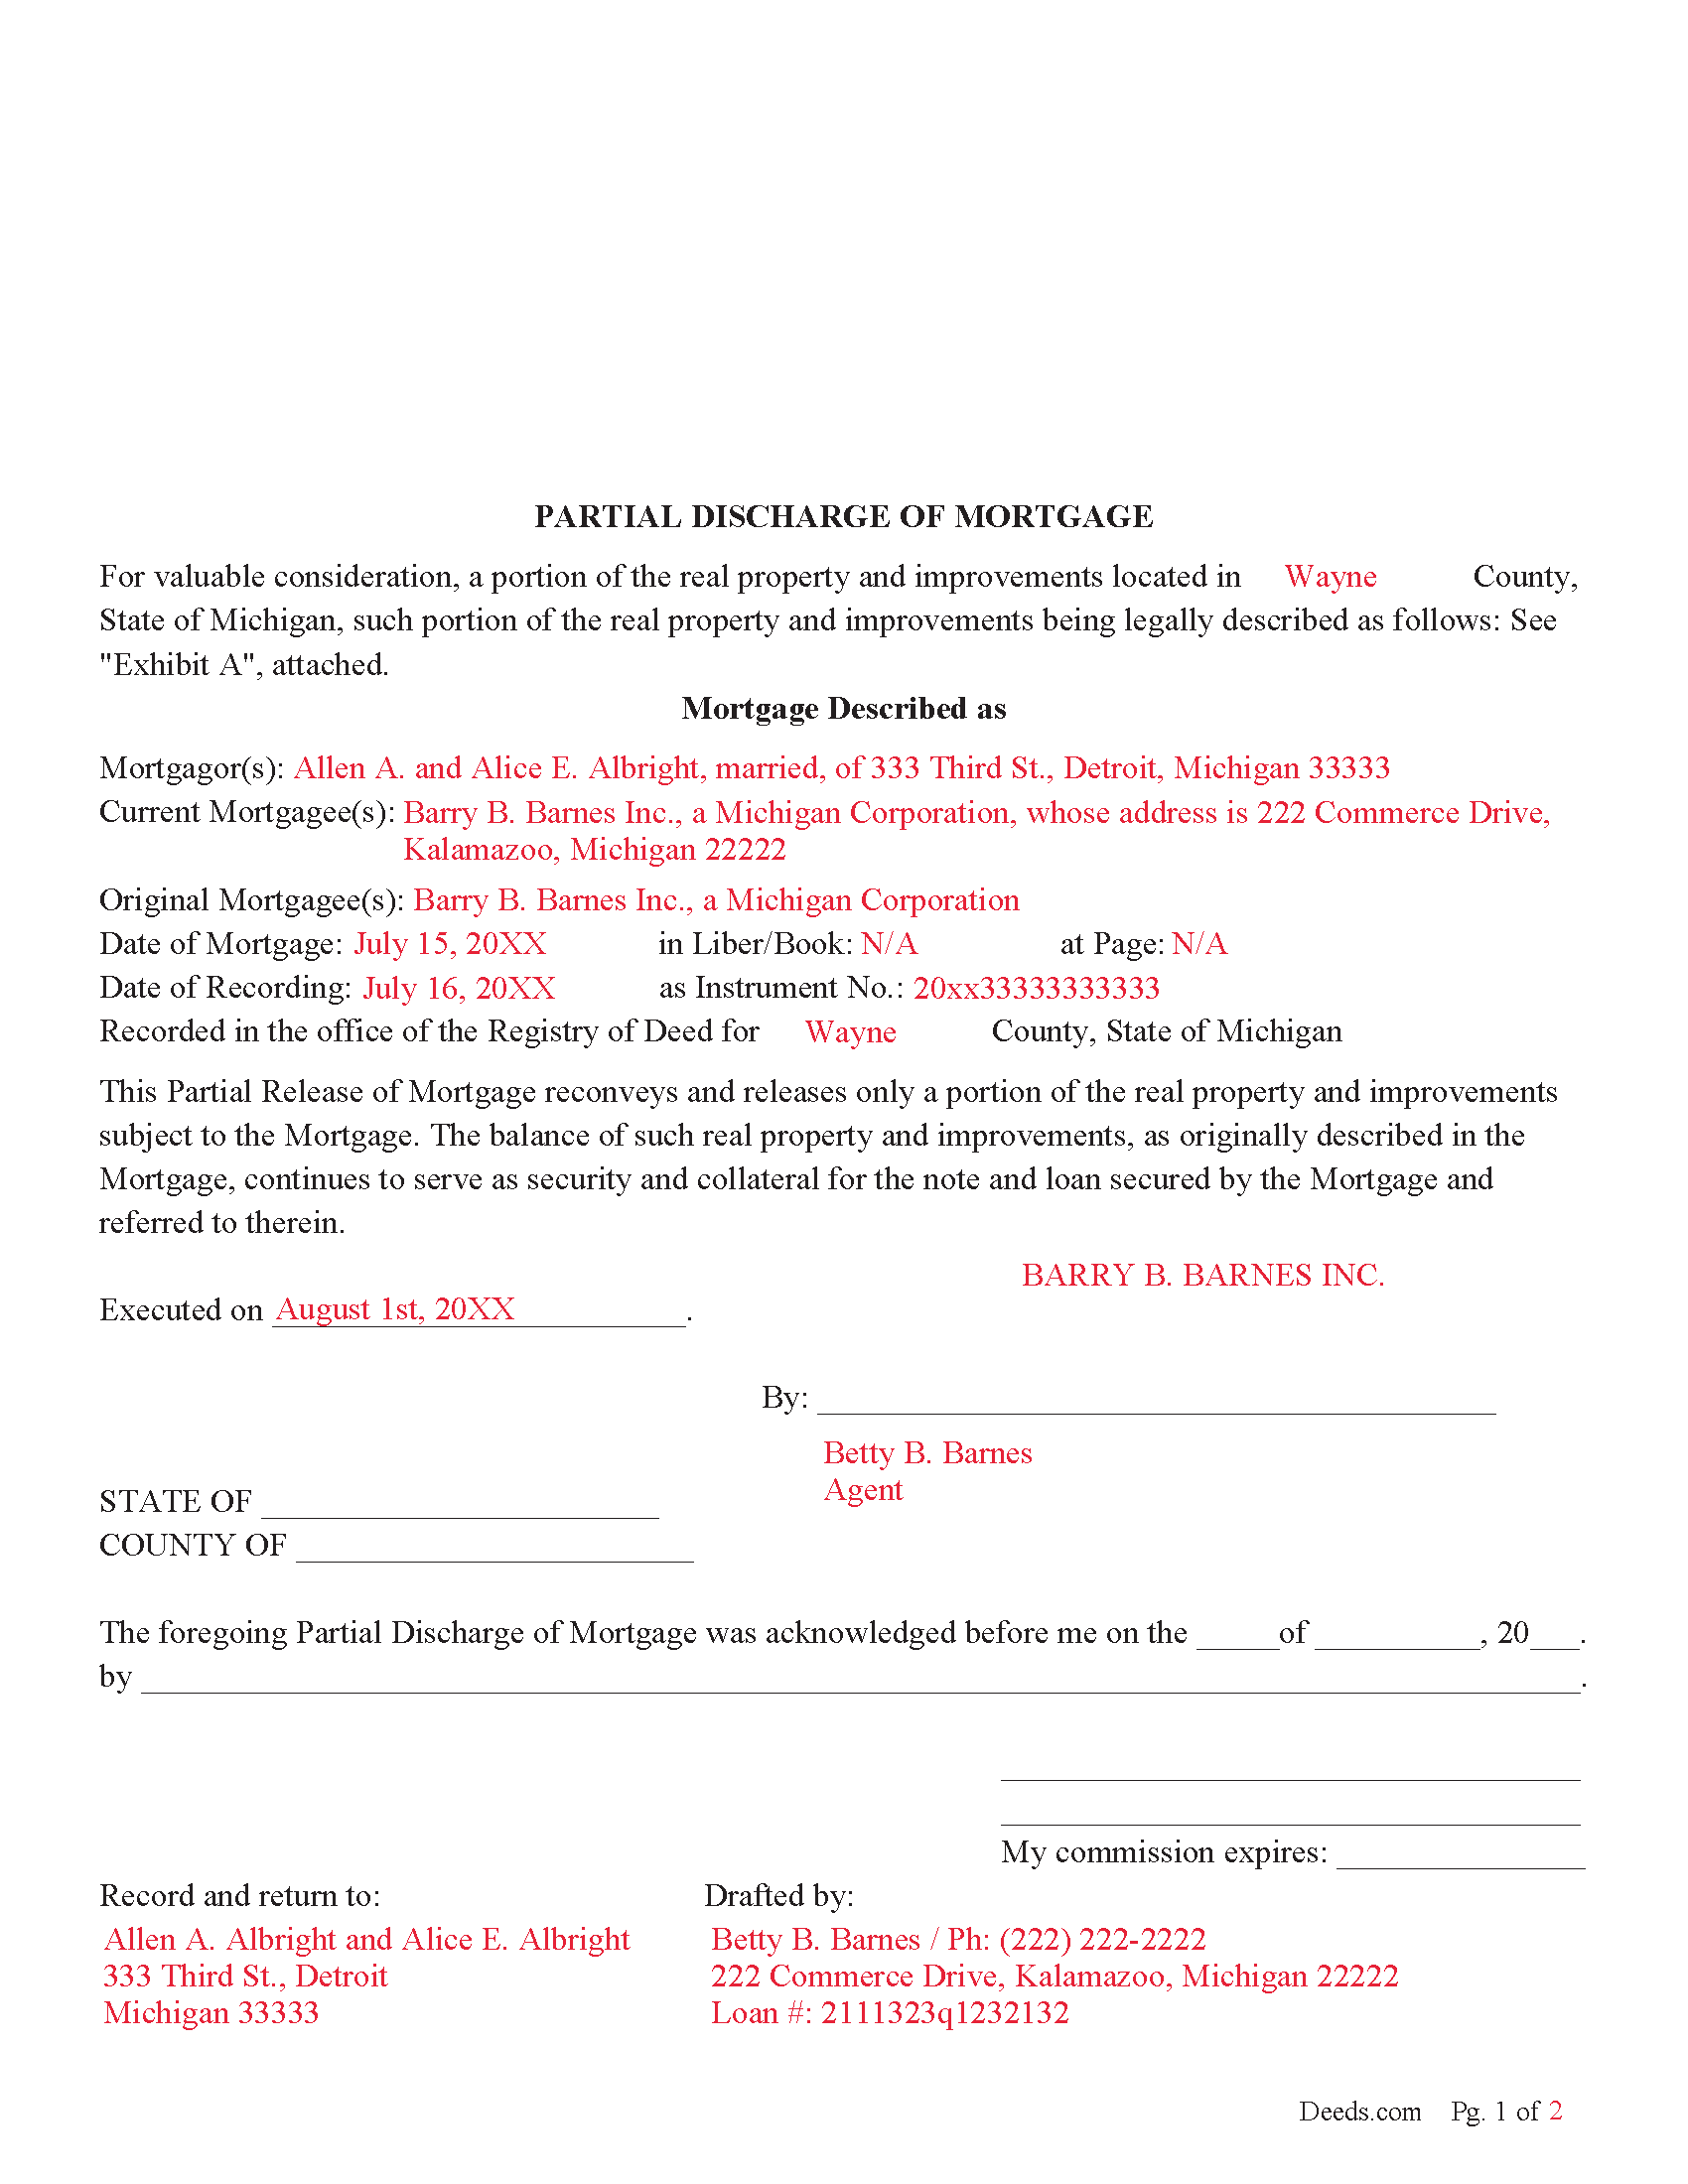 Completed Example of the Partial Discharge of Mortgage Document